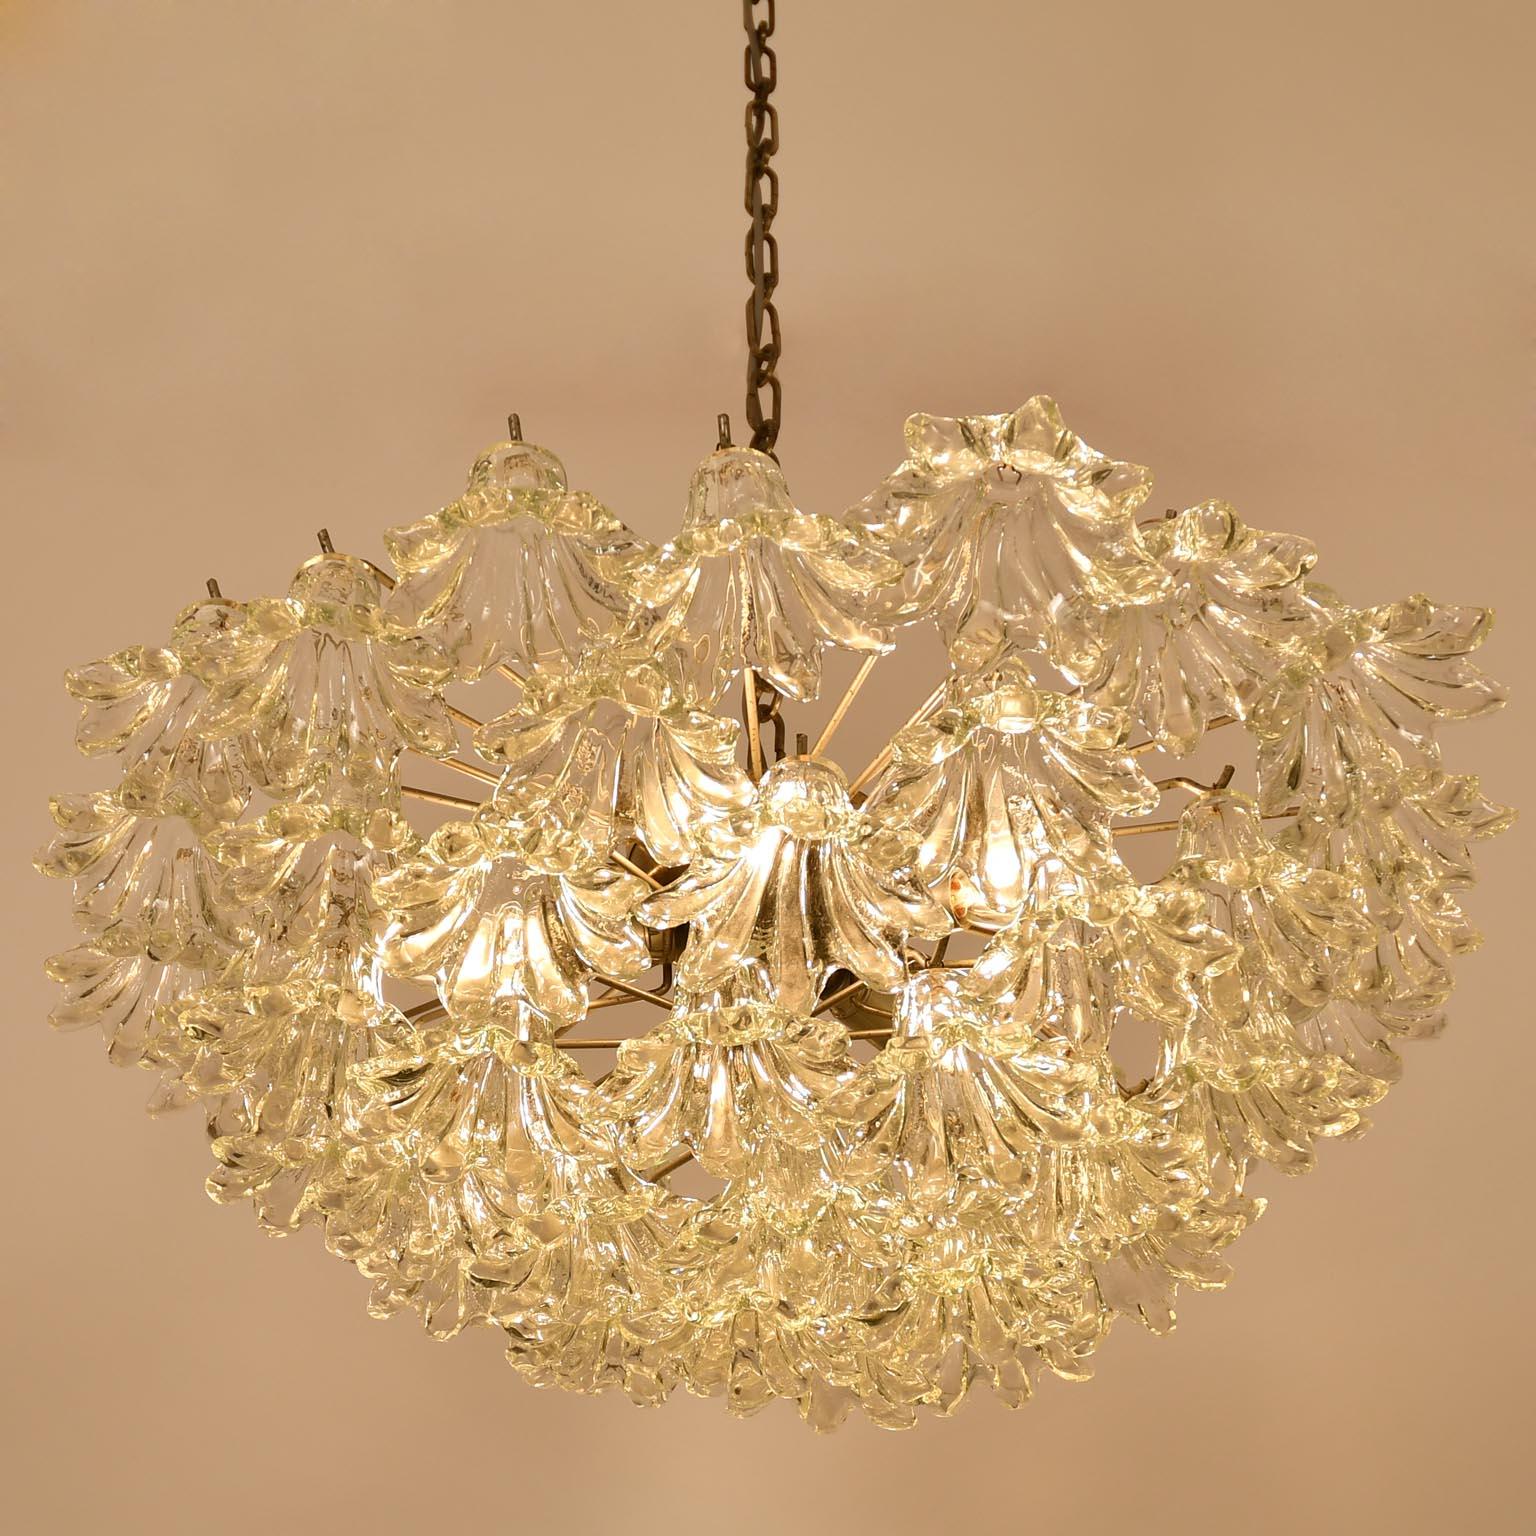 Italian Mid-Century Chandelier with Glass Blossoms, 1955, Murano For Sale 1